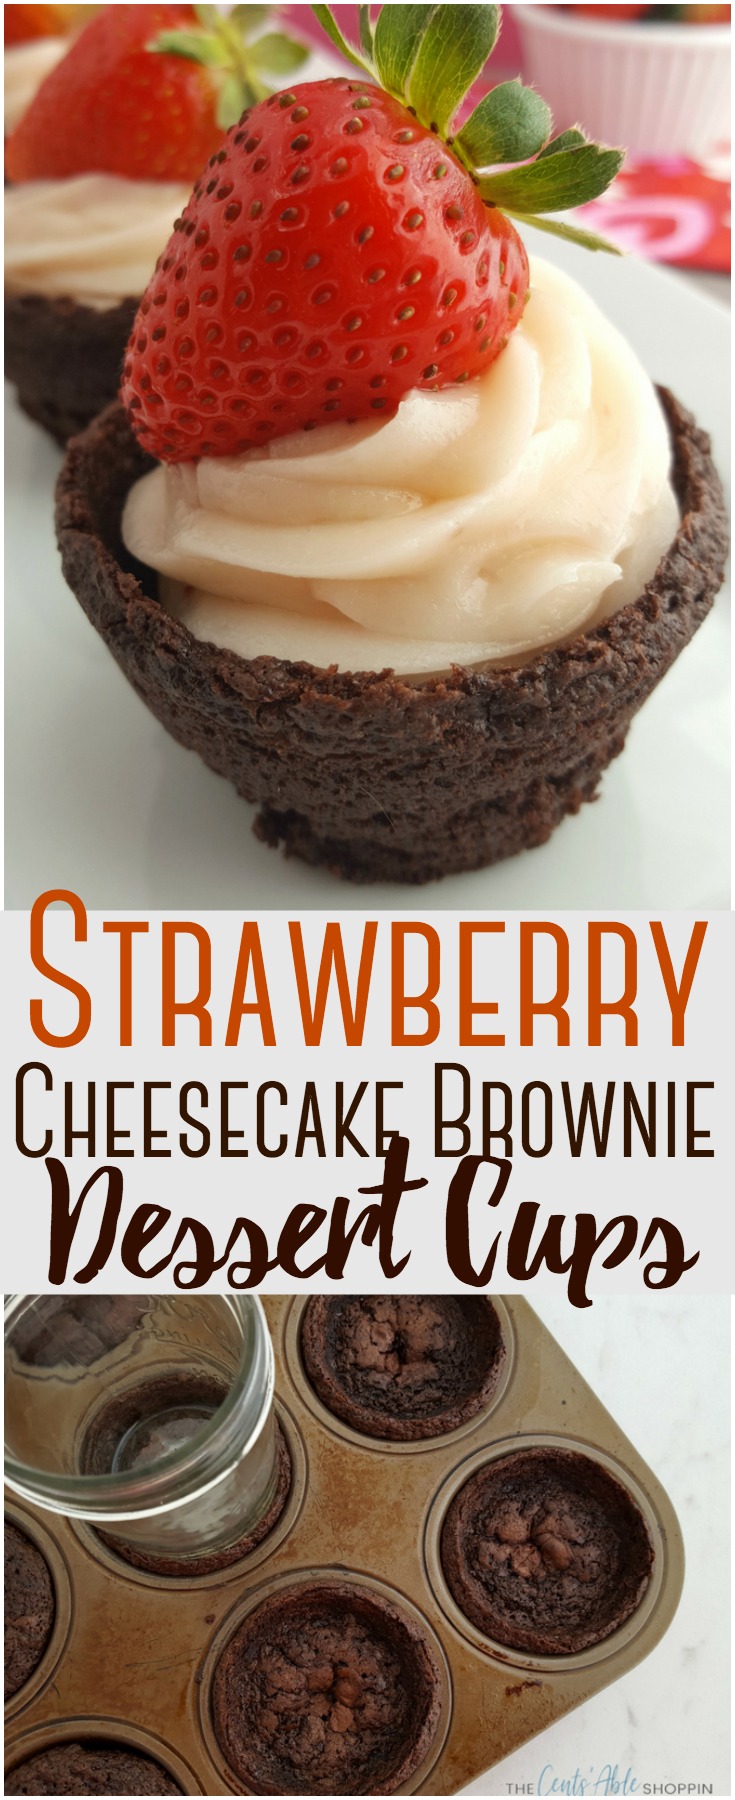 Combine strawberries with yummy cheesecake and brownies to make an adorable festive brownie cup dessert perfect for Valentine's Day! #strawberries #valentine #valentinesday #cheesecake